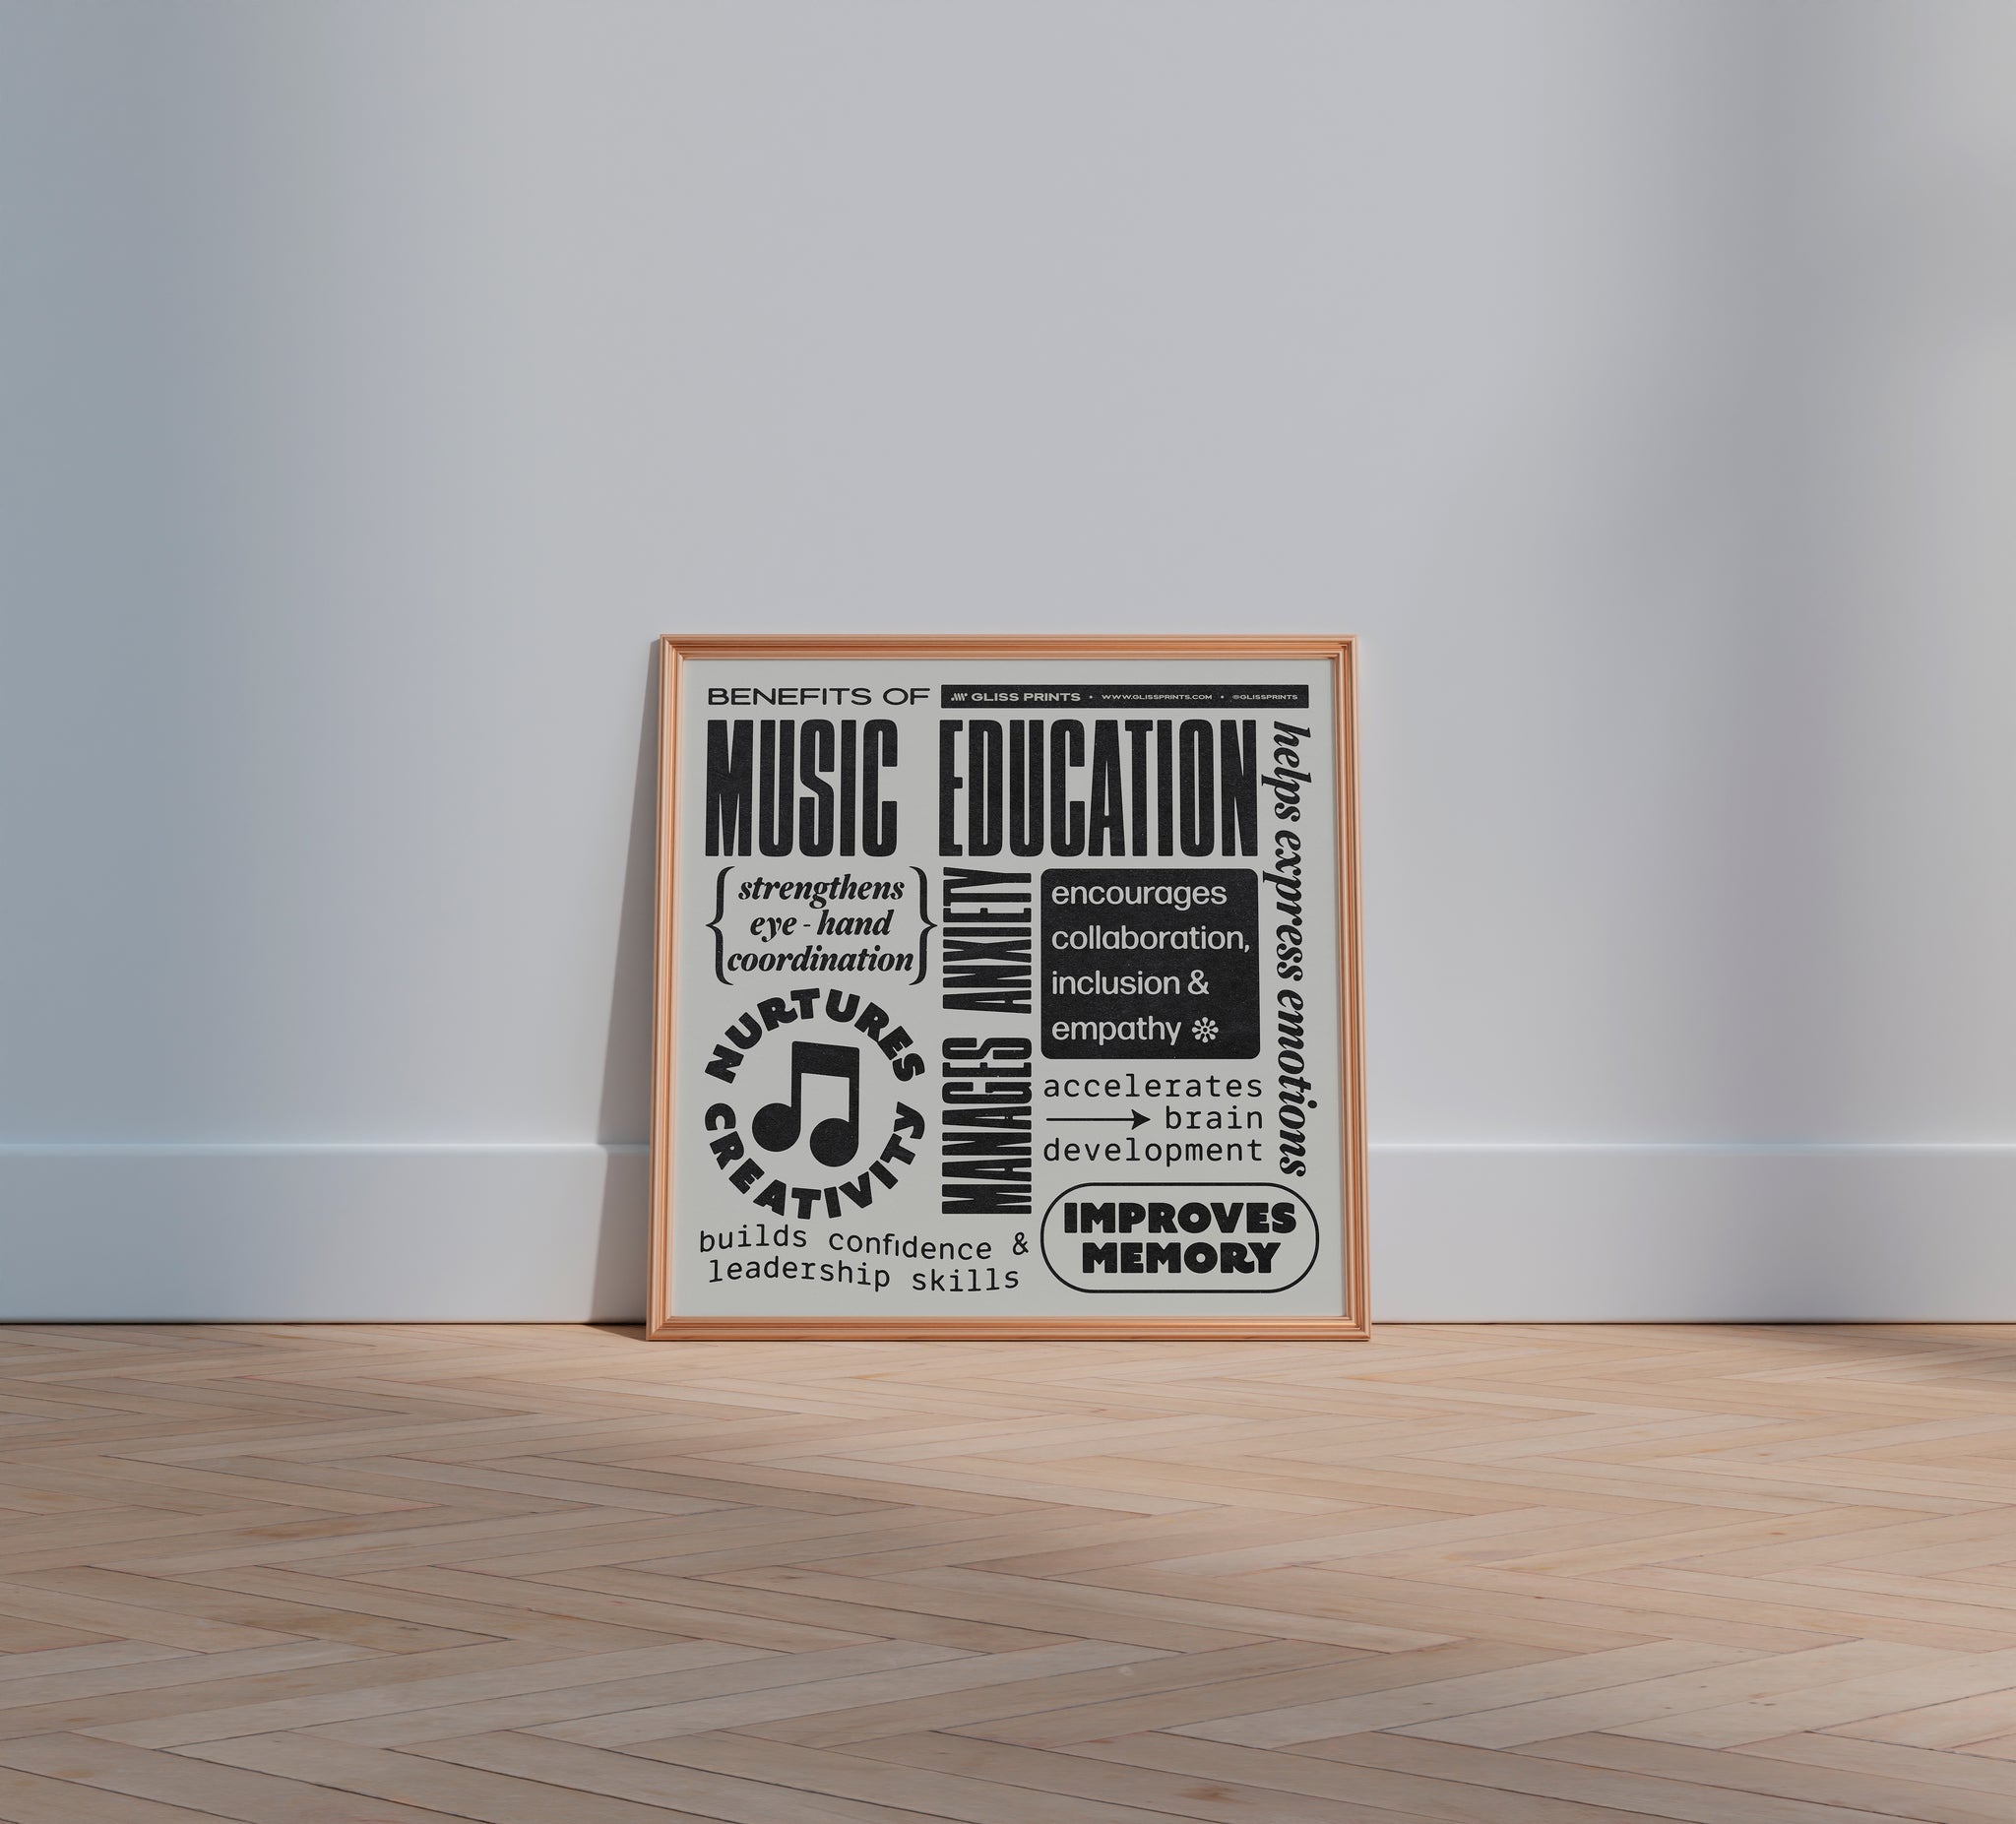 Benefits of Music Education Poster, Cream